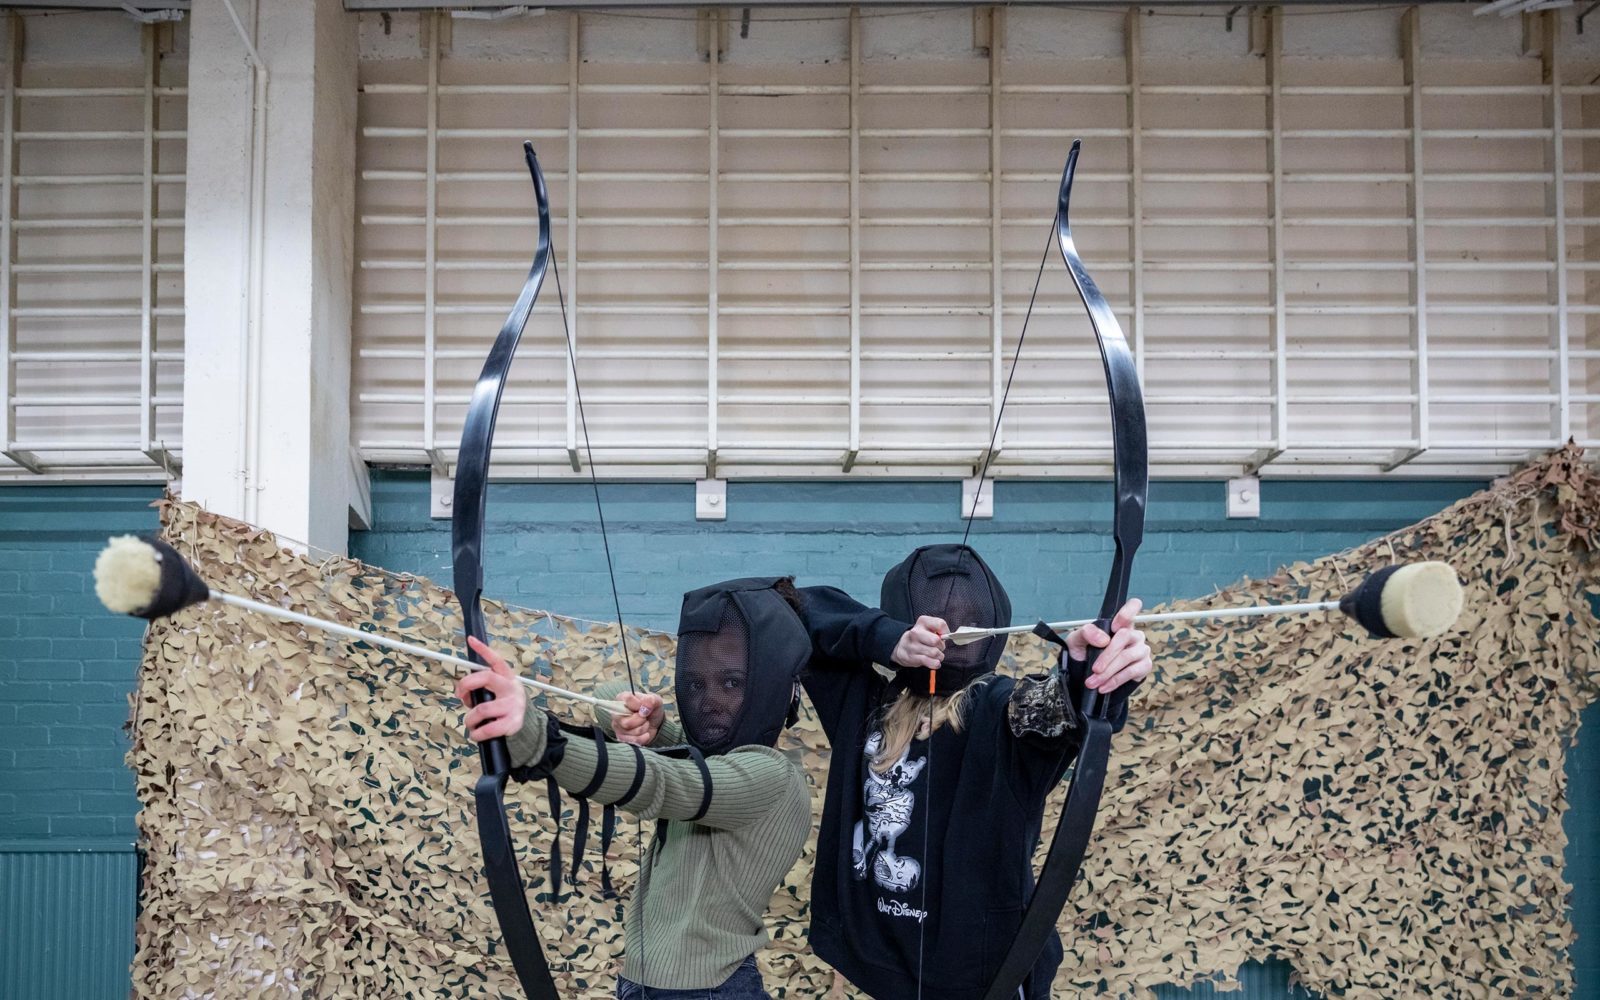 Archery For Kids | Things to do at Shrewsbury Prison